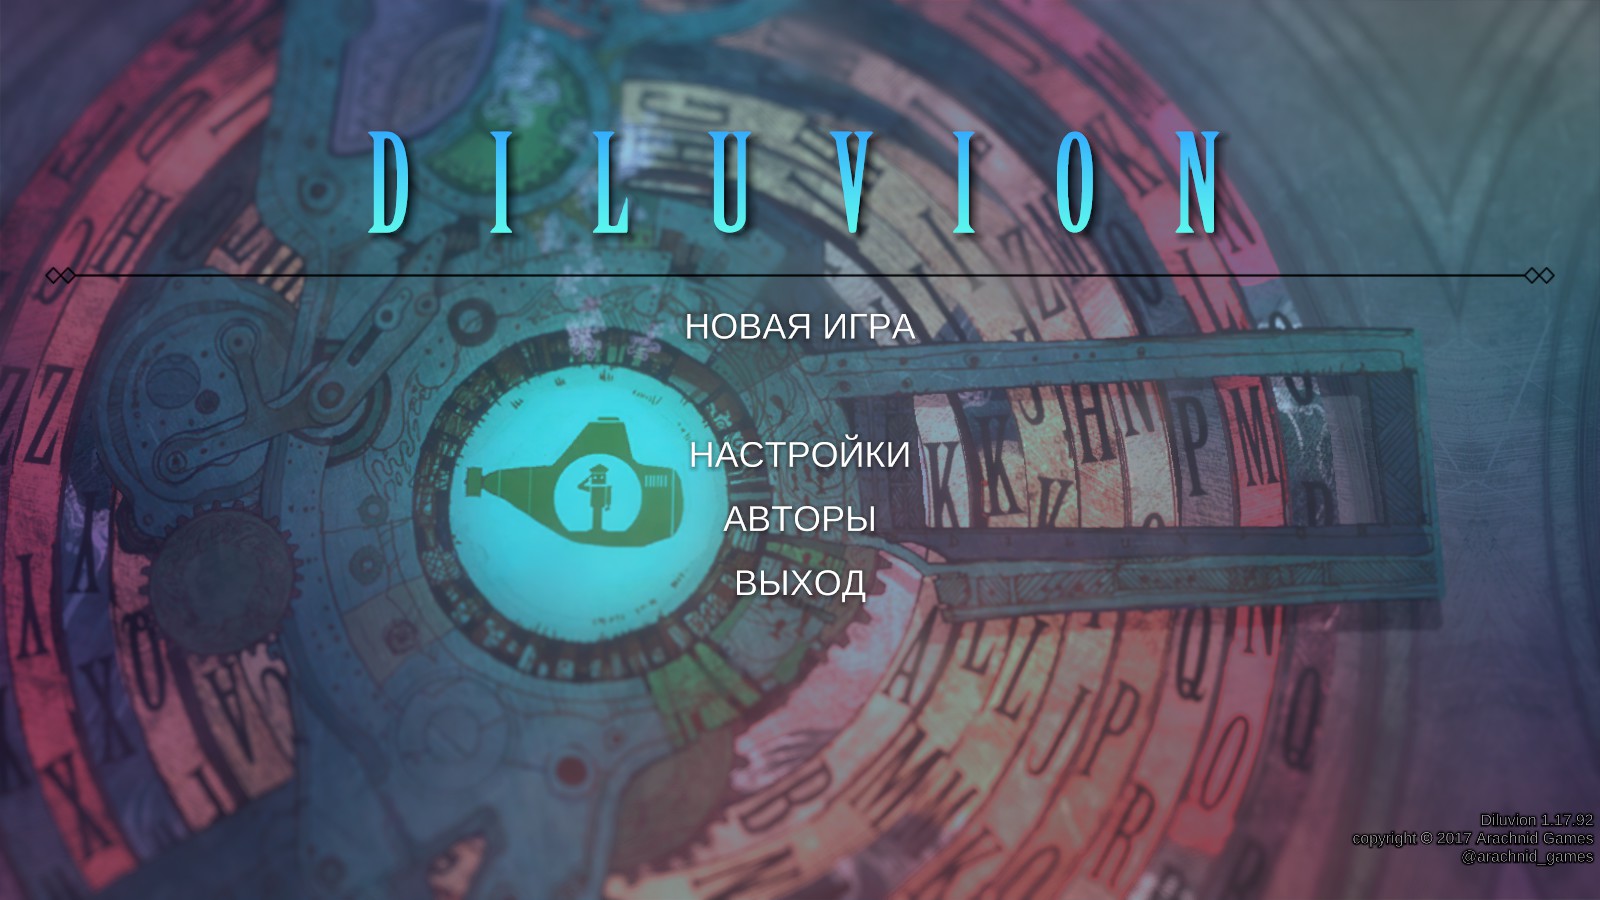 diluvion steam download free